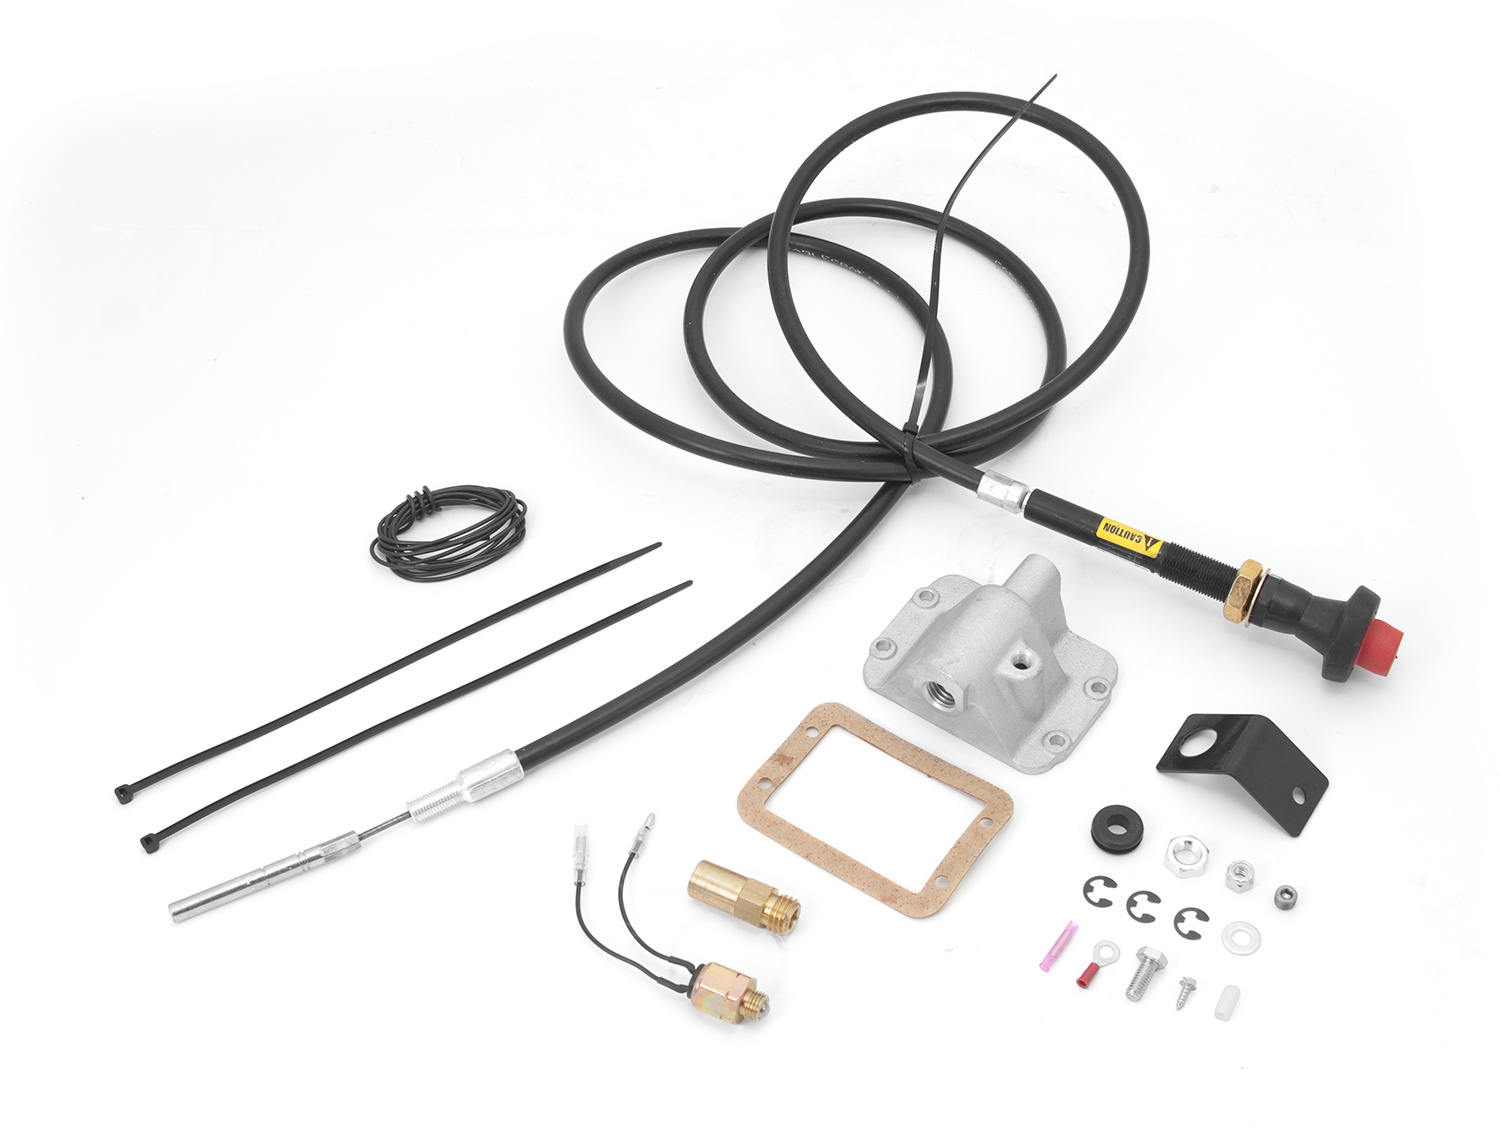 Alloy USA Alloy USA 450920 Differential Cable Lock Disconnect Kit